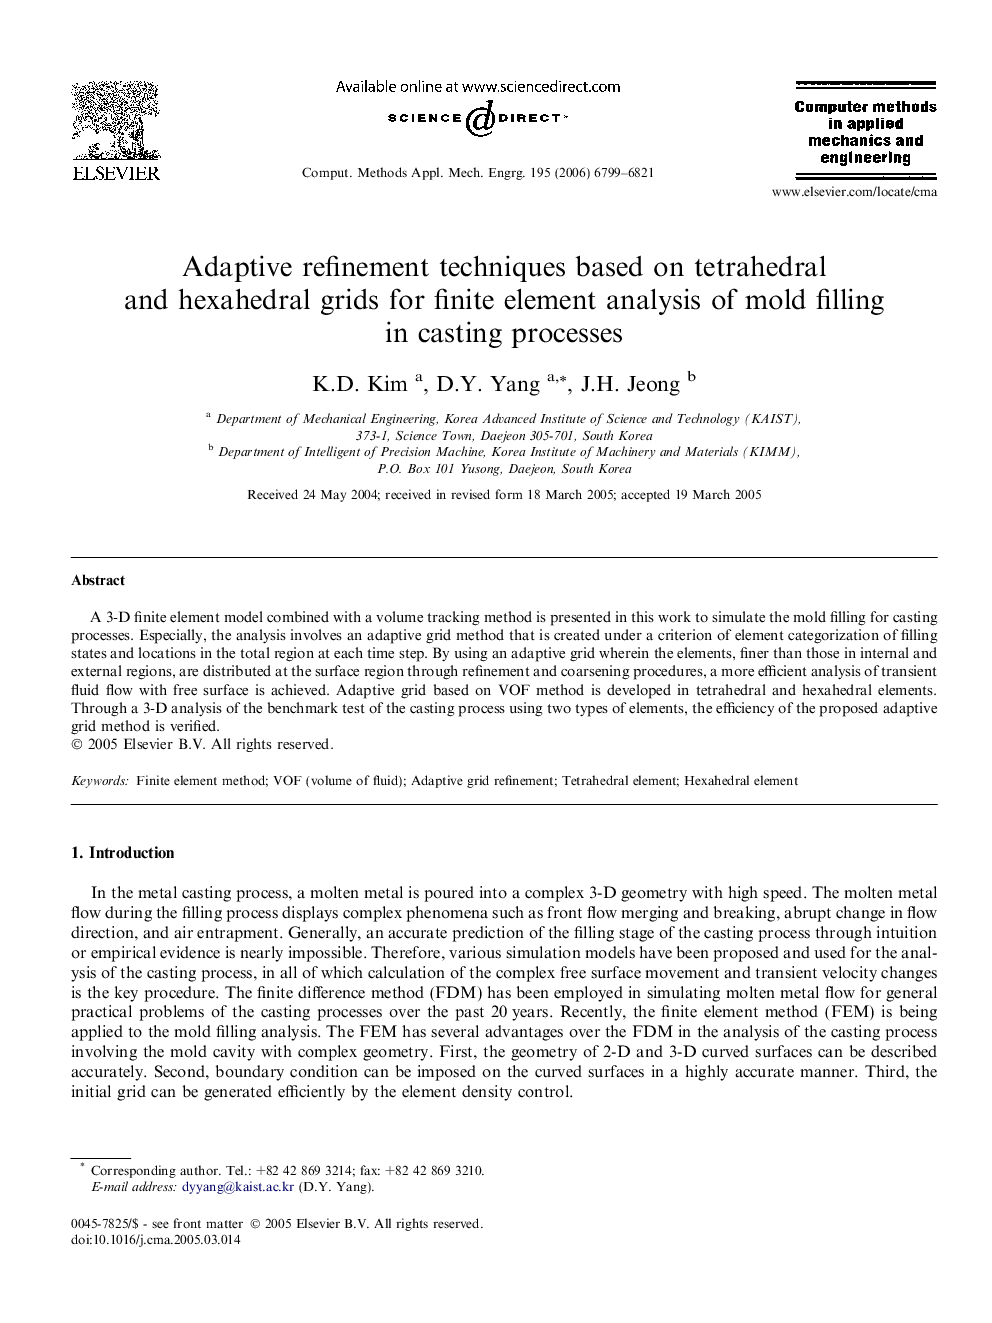 Adaptive refinement techniques based on tetrahedral and hexahedral grids for finite element analysis of mold filling in casting processes